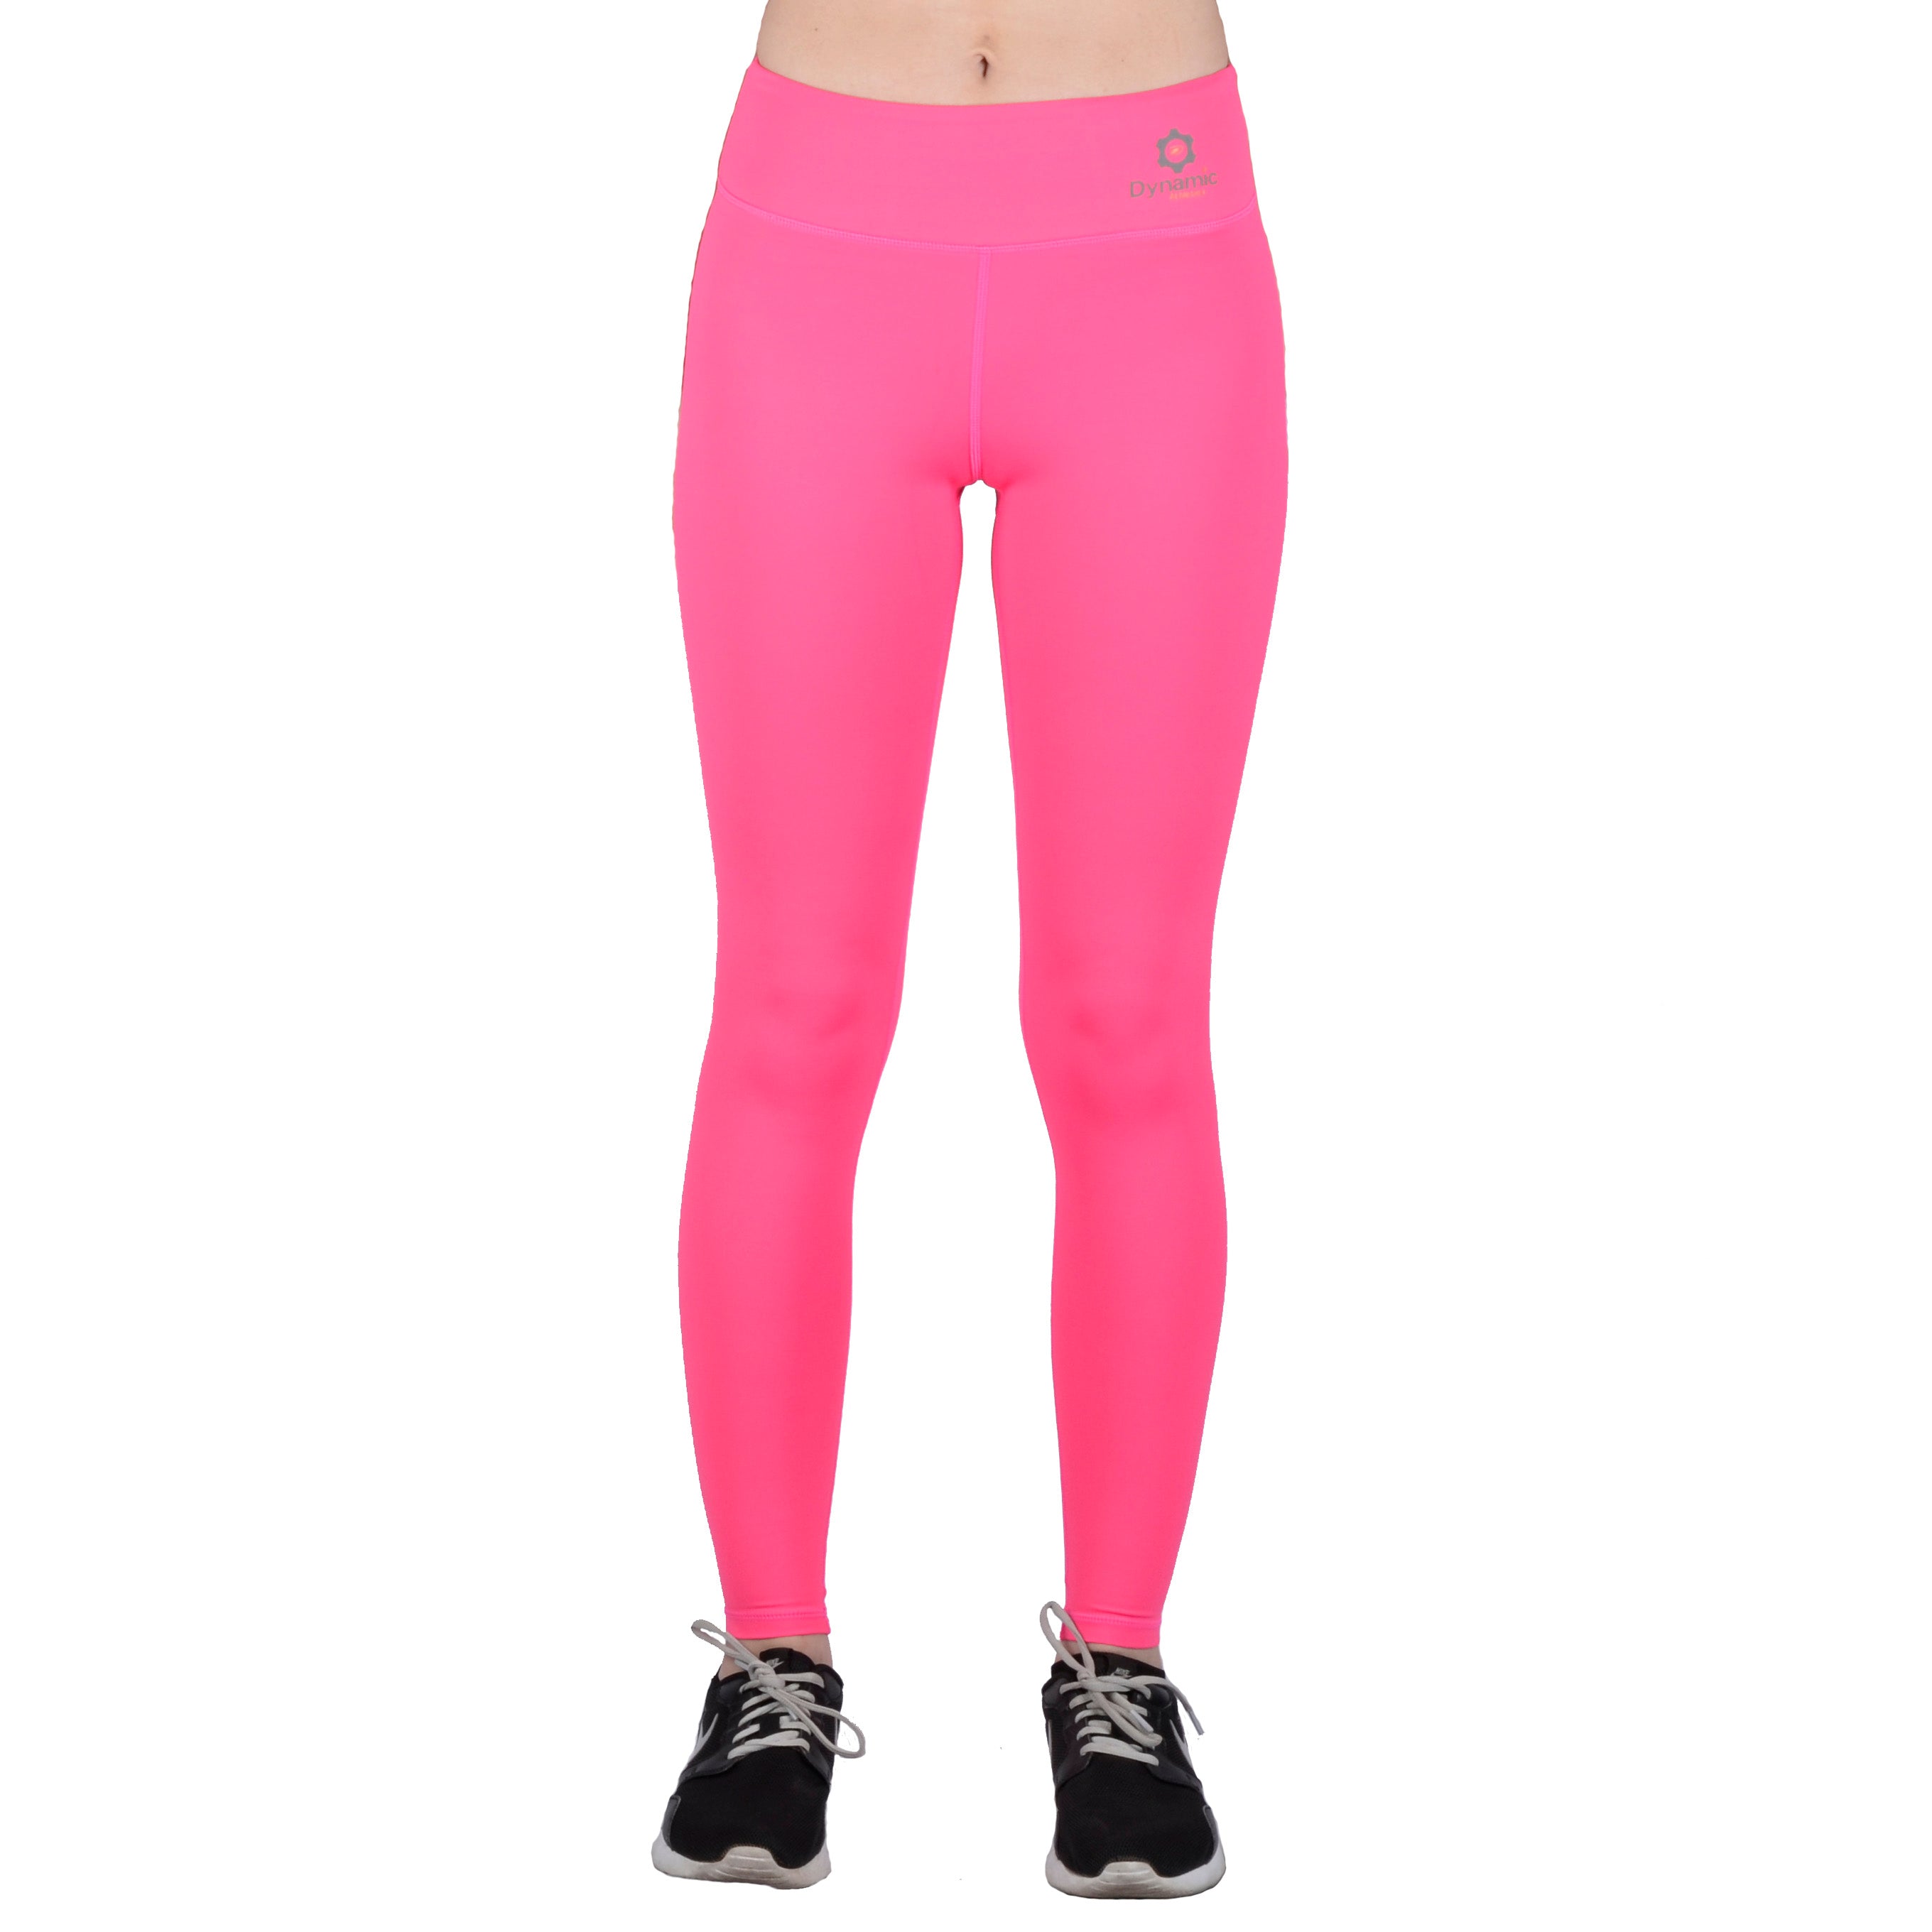 Women’s Dynamic Mid Waist Active Recovery Legging